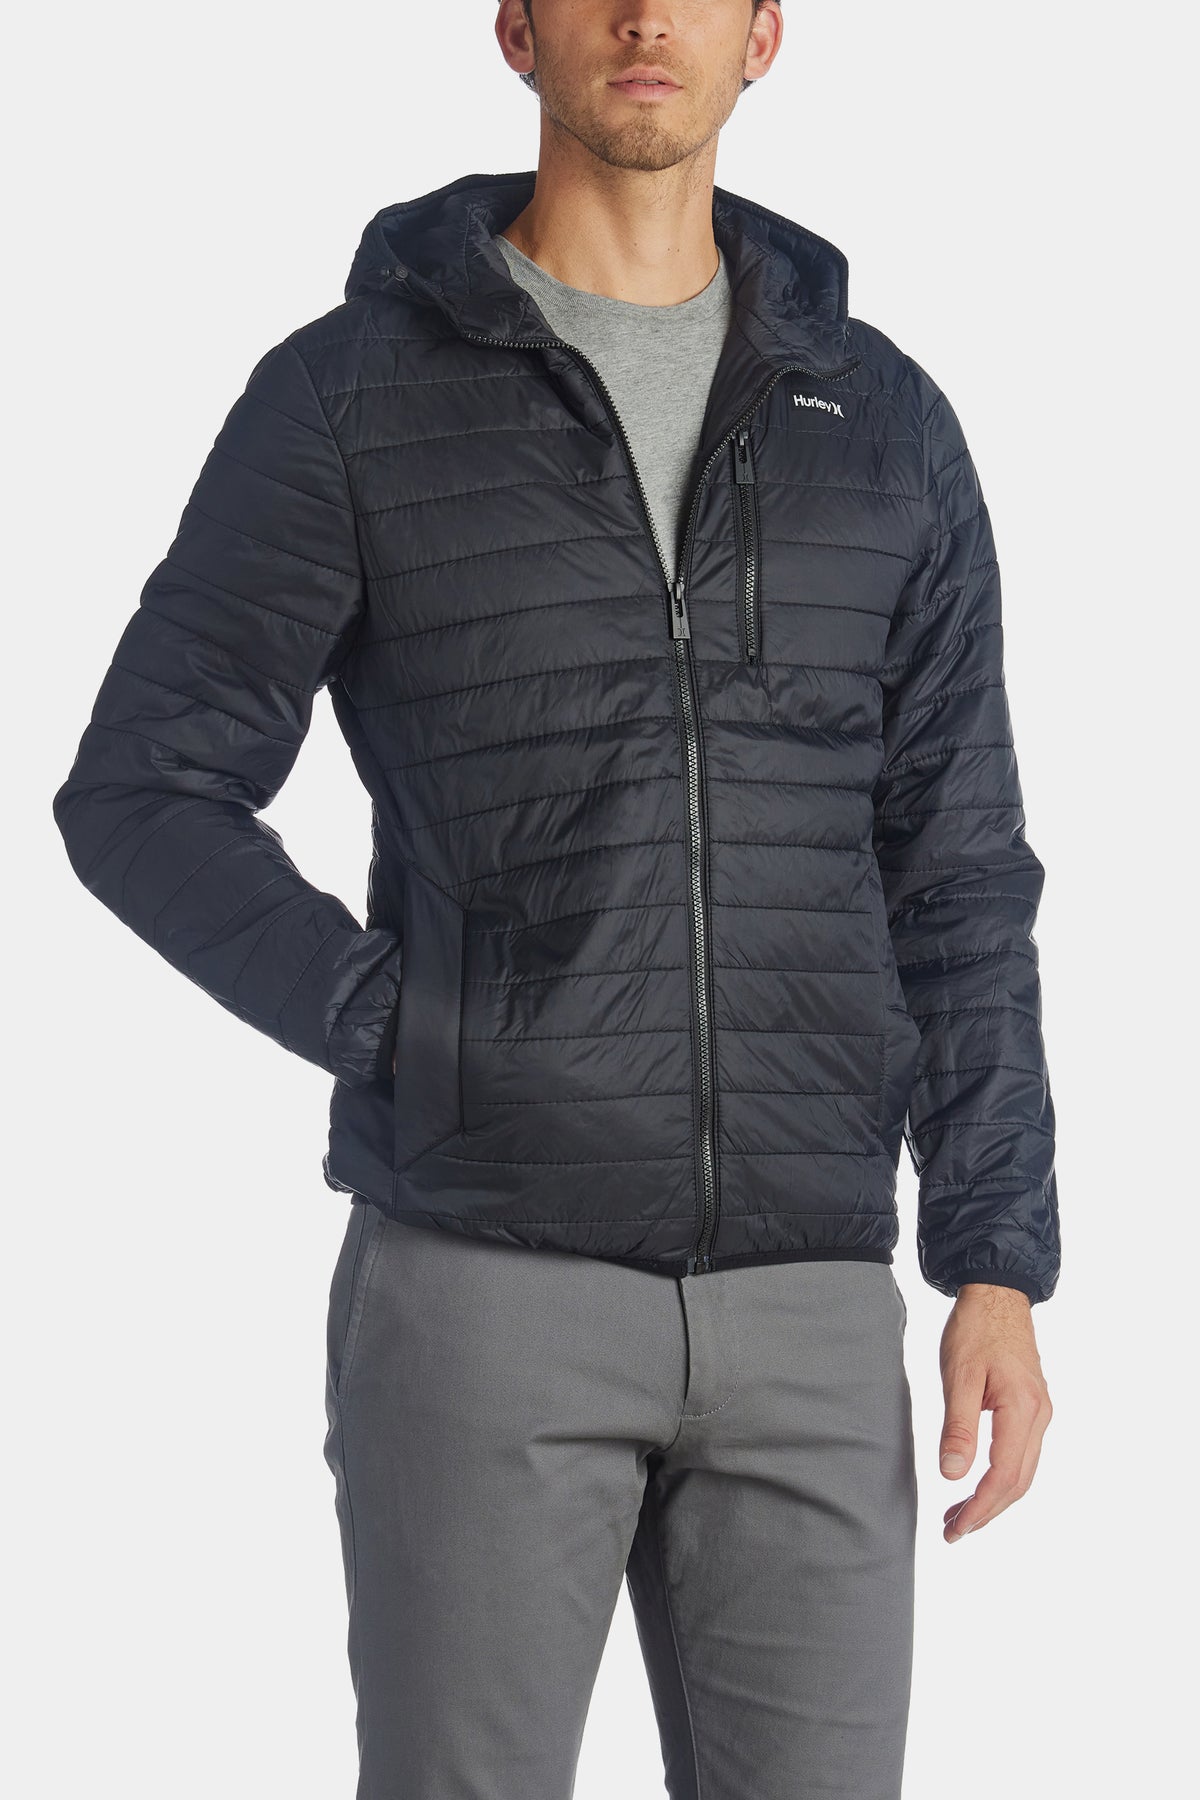 Hurley Balsam Packable Jacket - Insulated - Save 50%